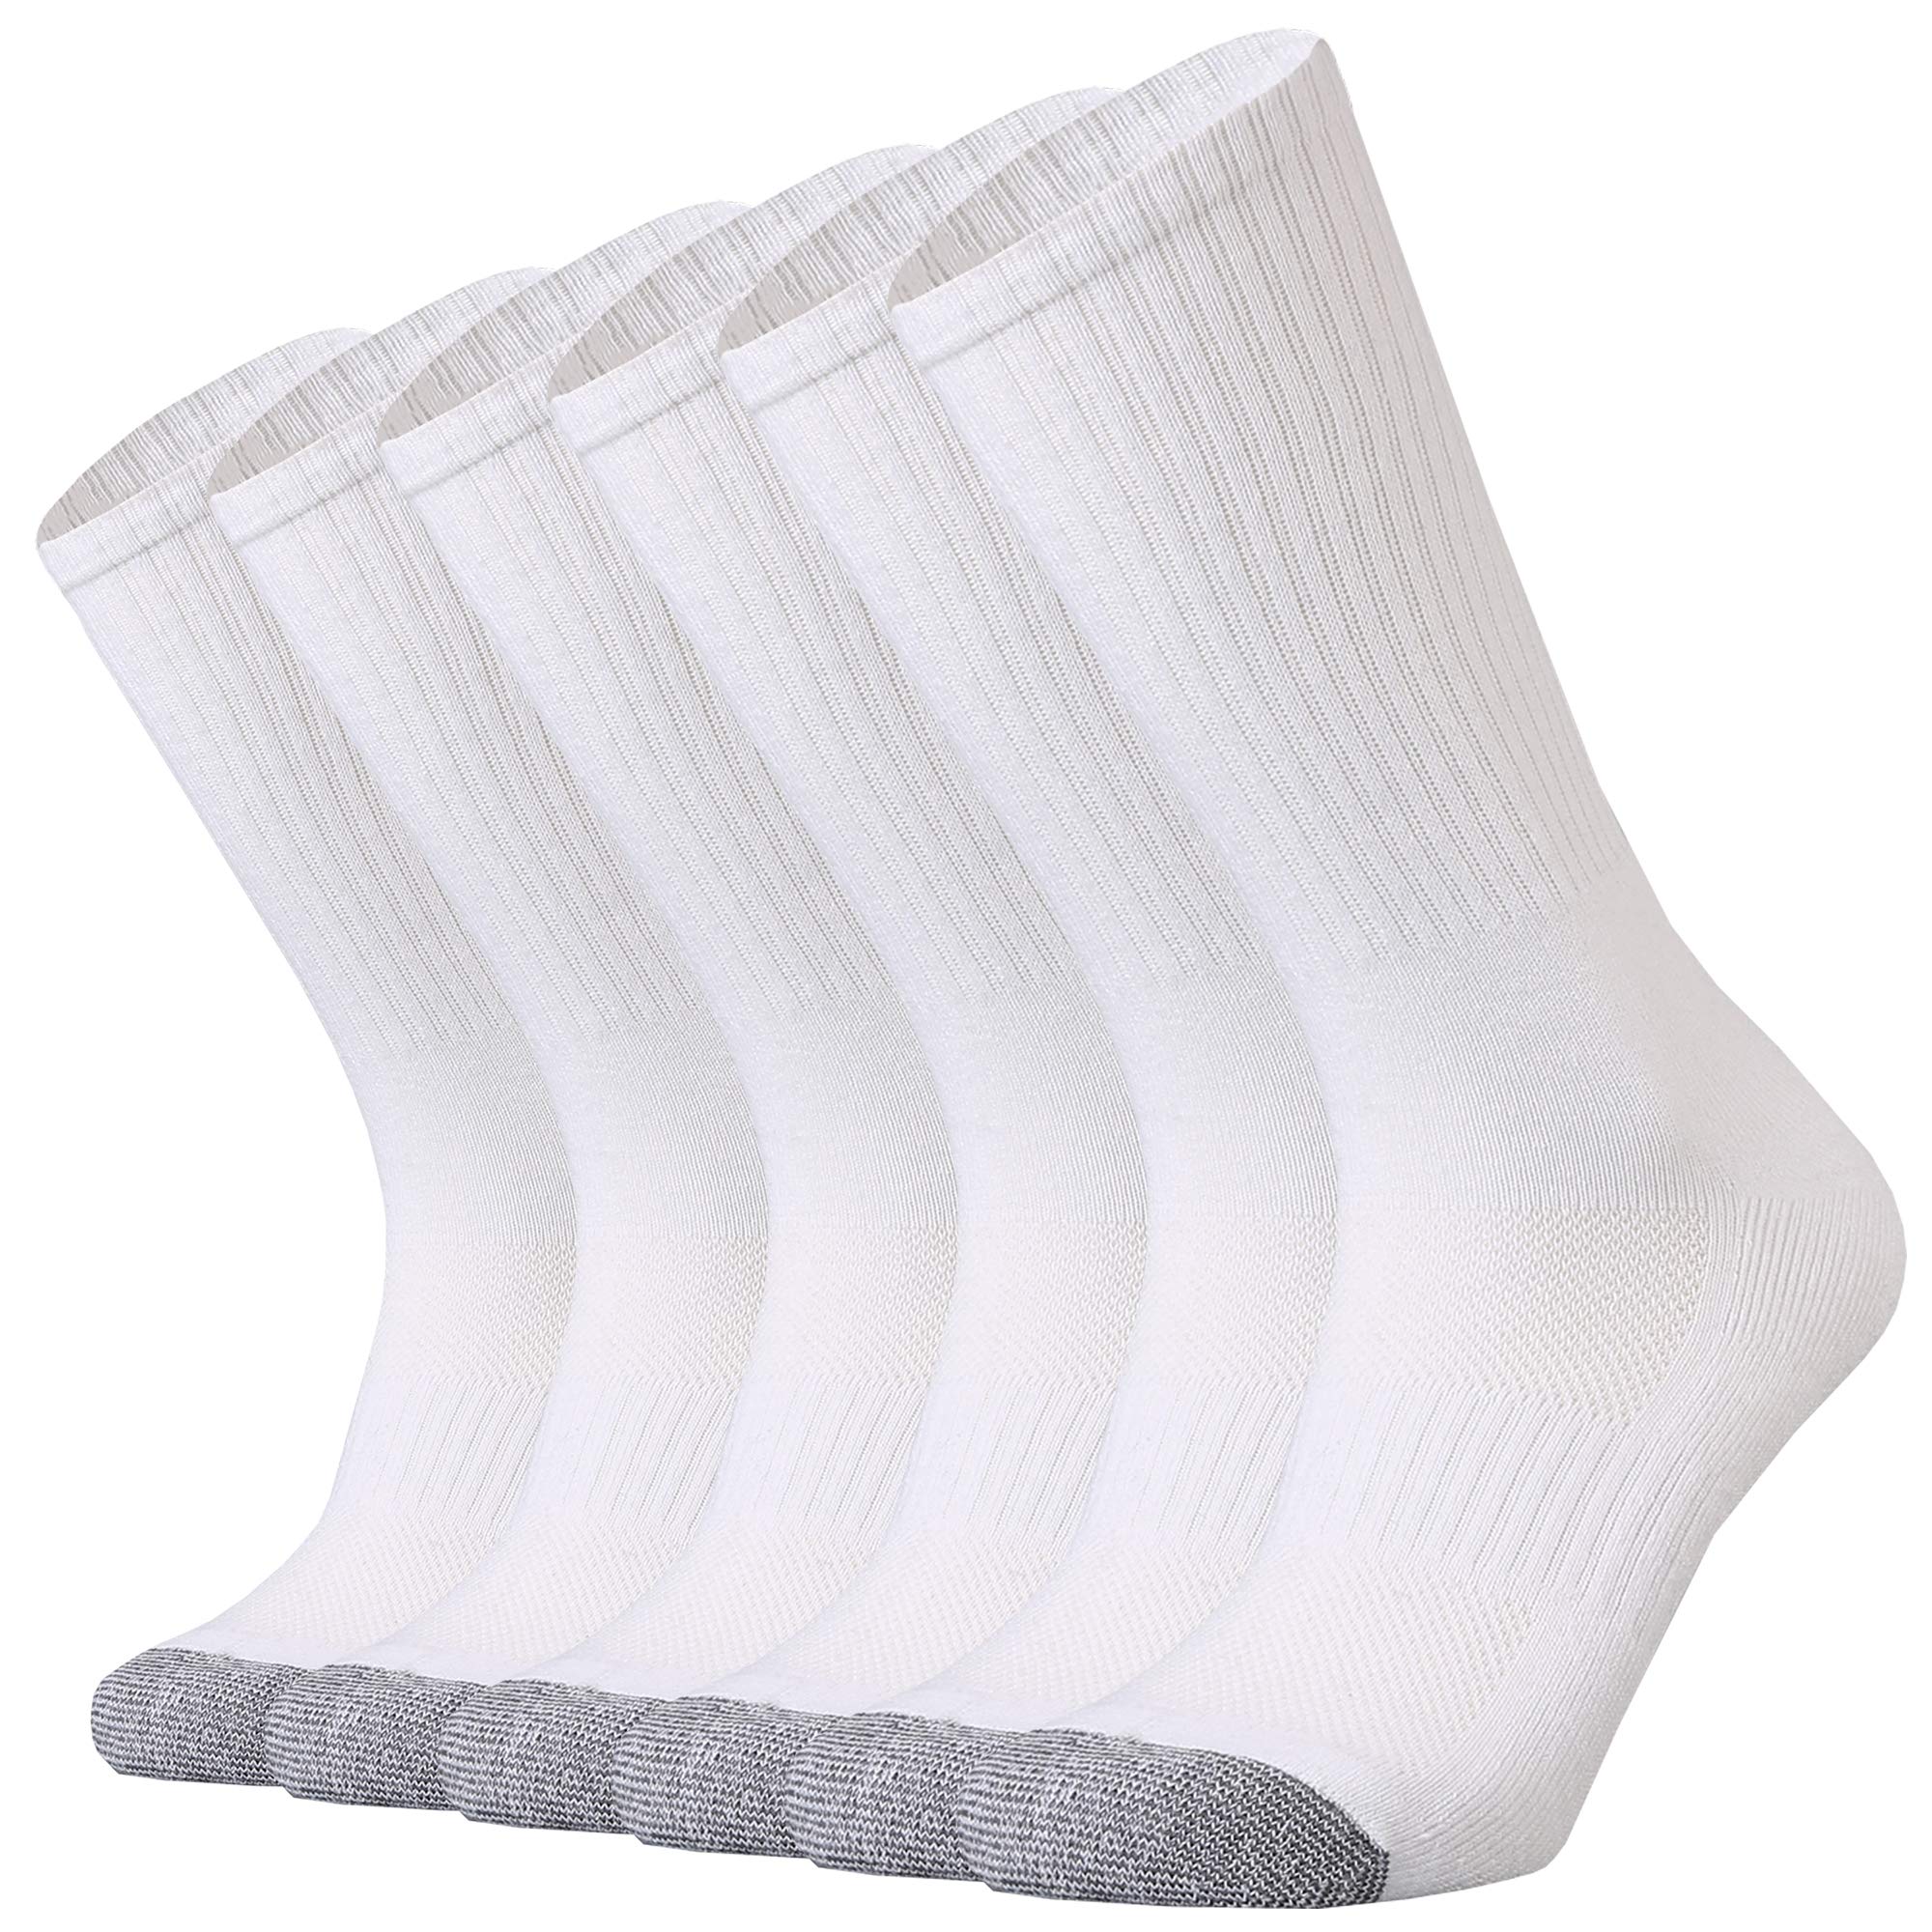 SOX TOWN Unisex Cushioned Crew Training Athletic Socks Men & Women with Combed Cotton Moisture Wicking Breathable Performance(White XL)